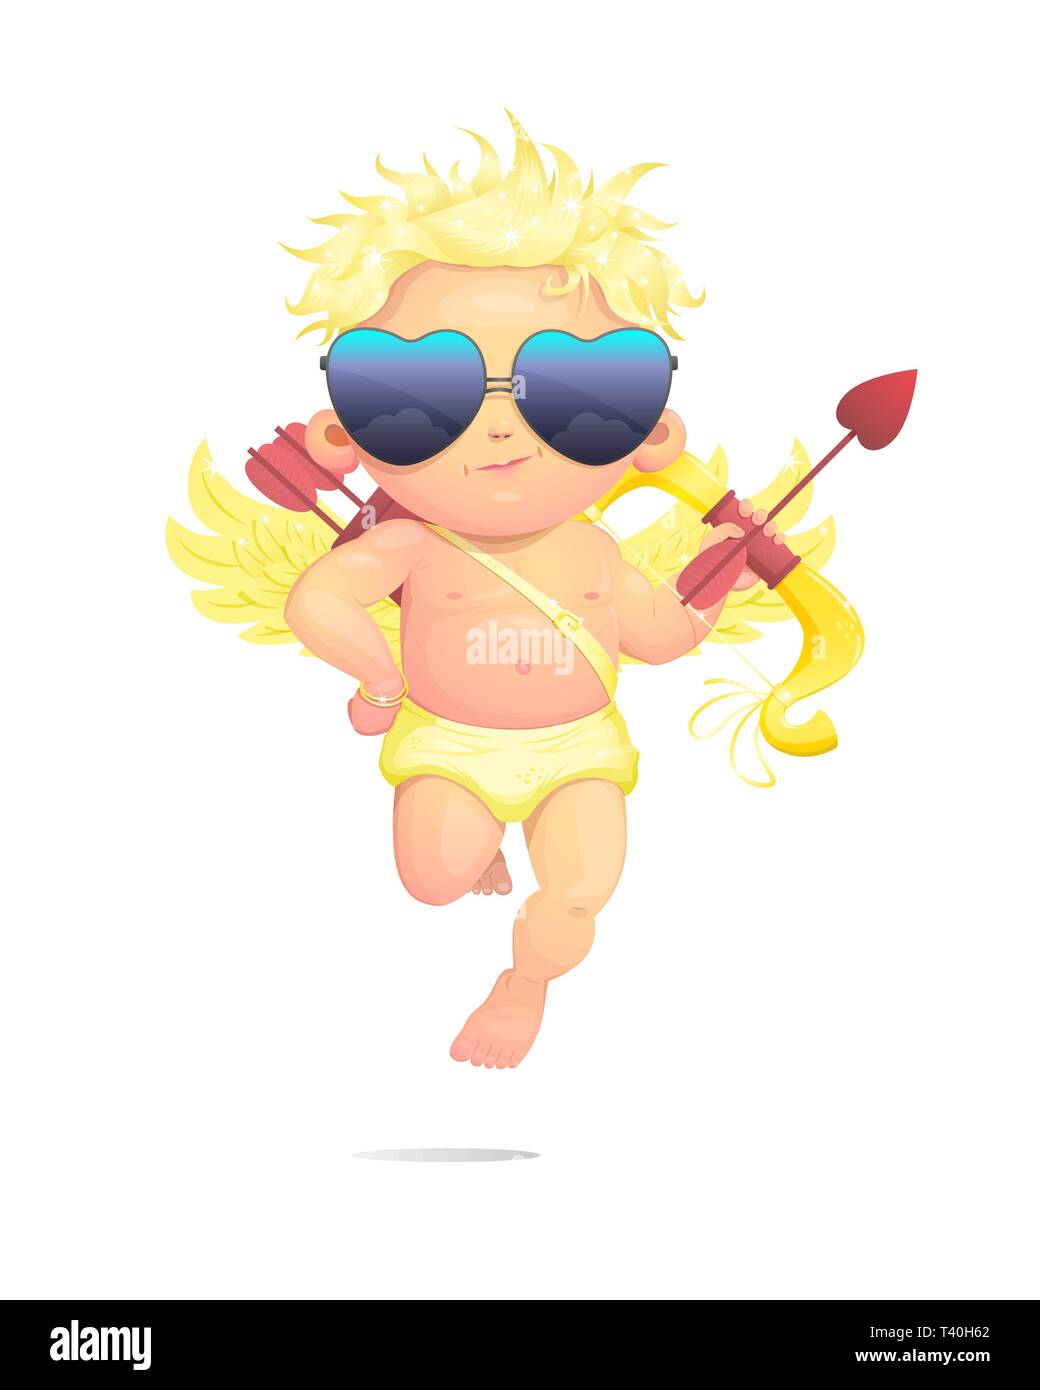 Illustration of cute cupid for valentine's day. He is smiling, holding a gold bow and wearing black sunglasses the character has gold curly hair. Stock Vector